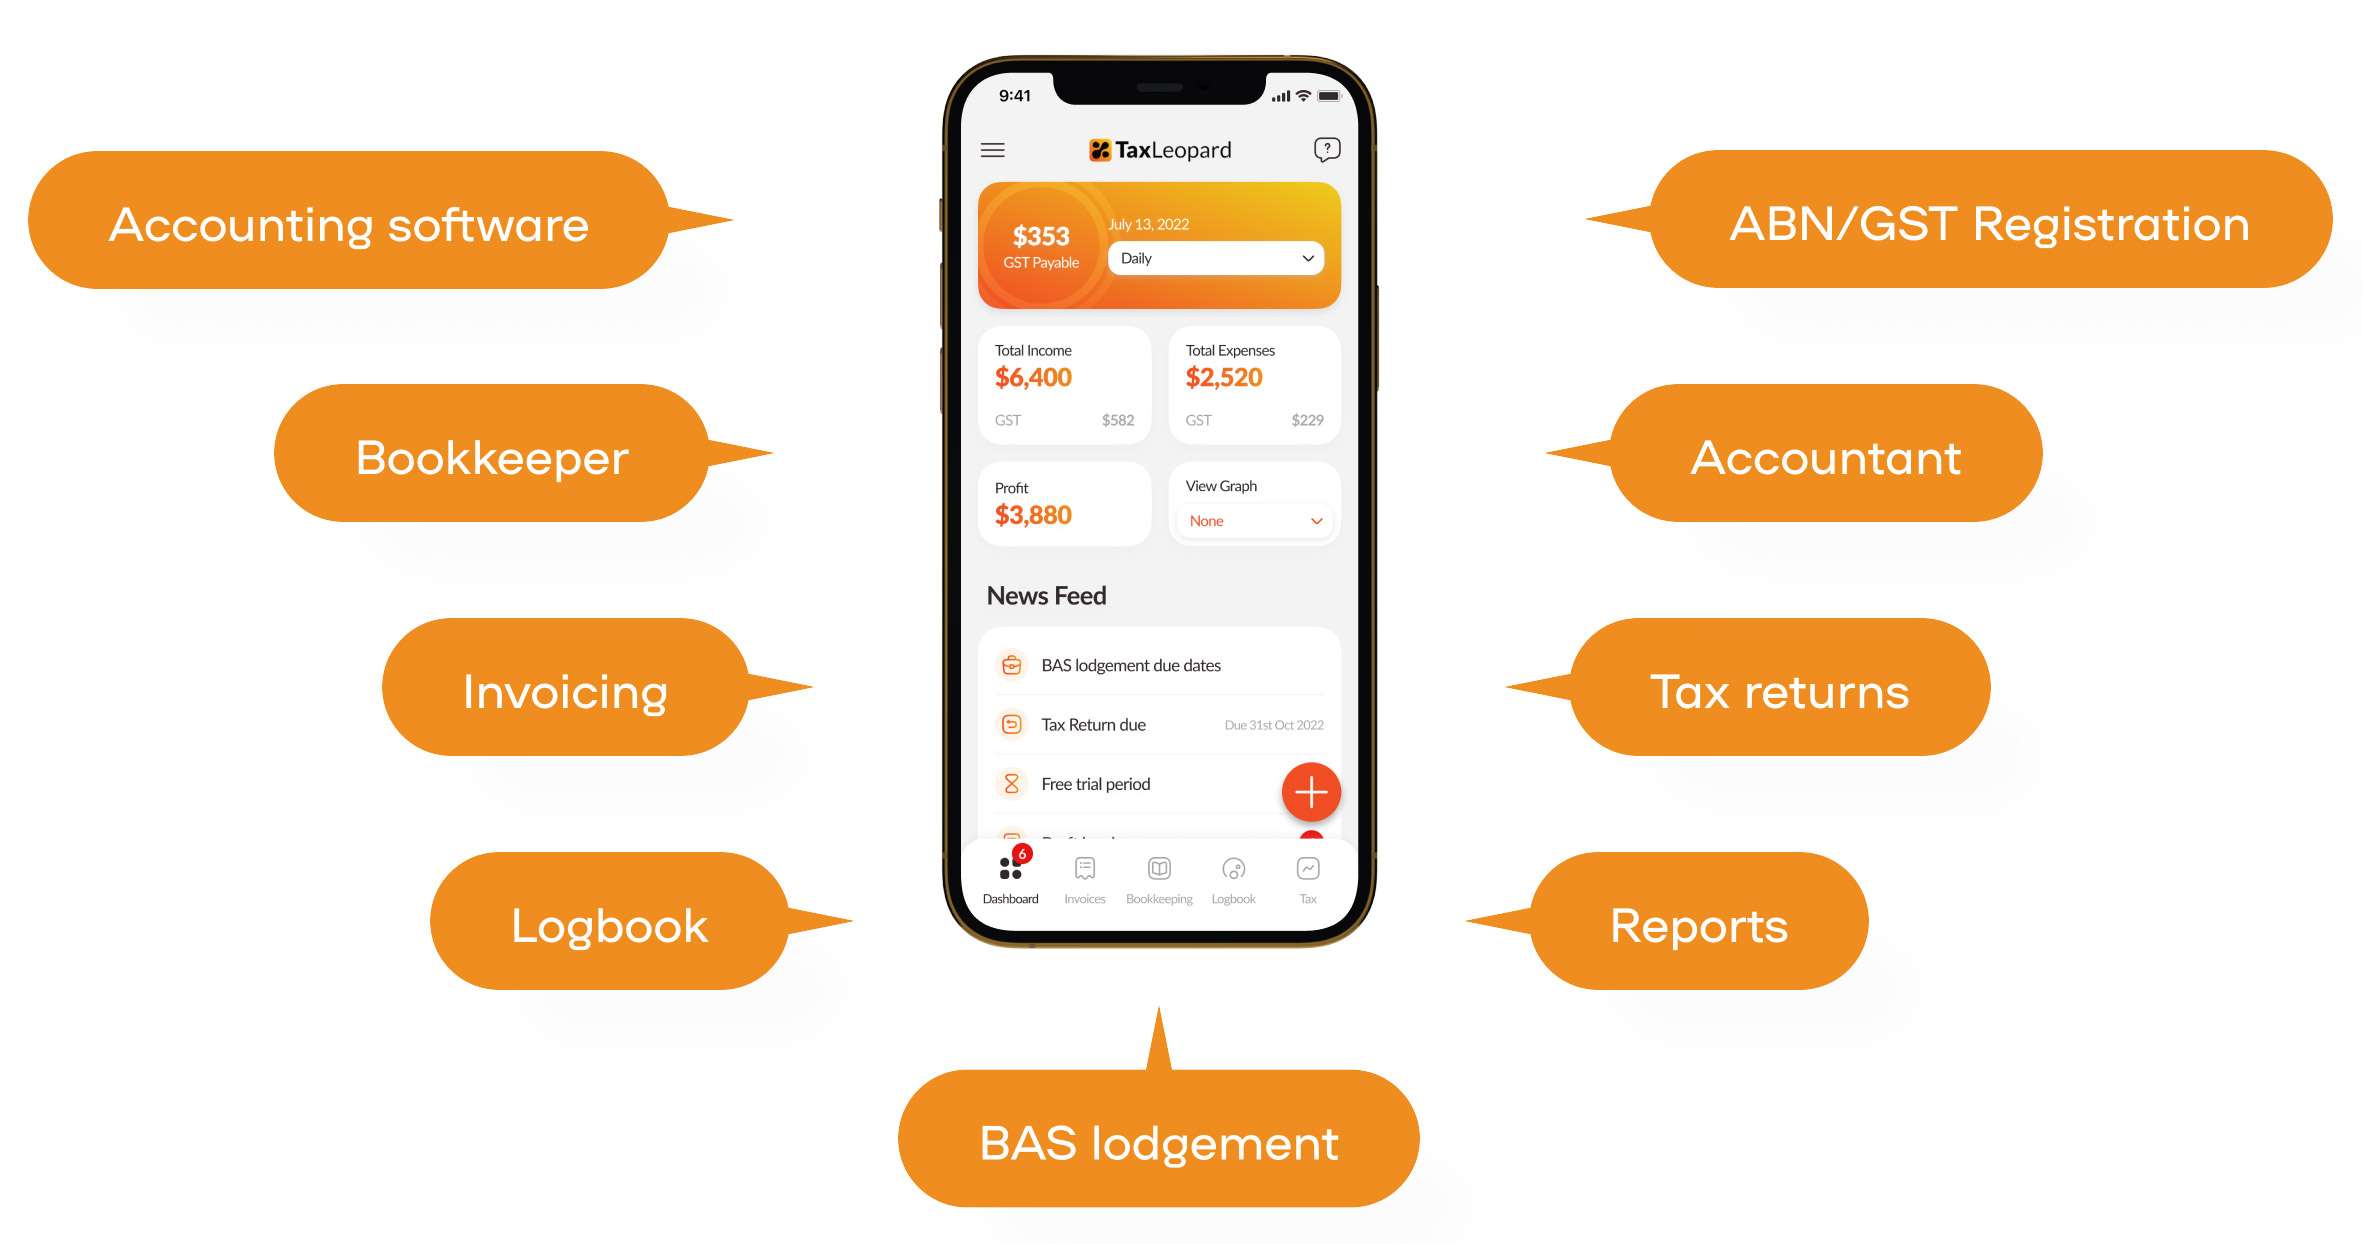 All tax services in one app - BAS, Accountant, Tax Returns